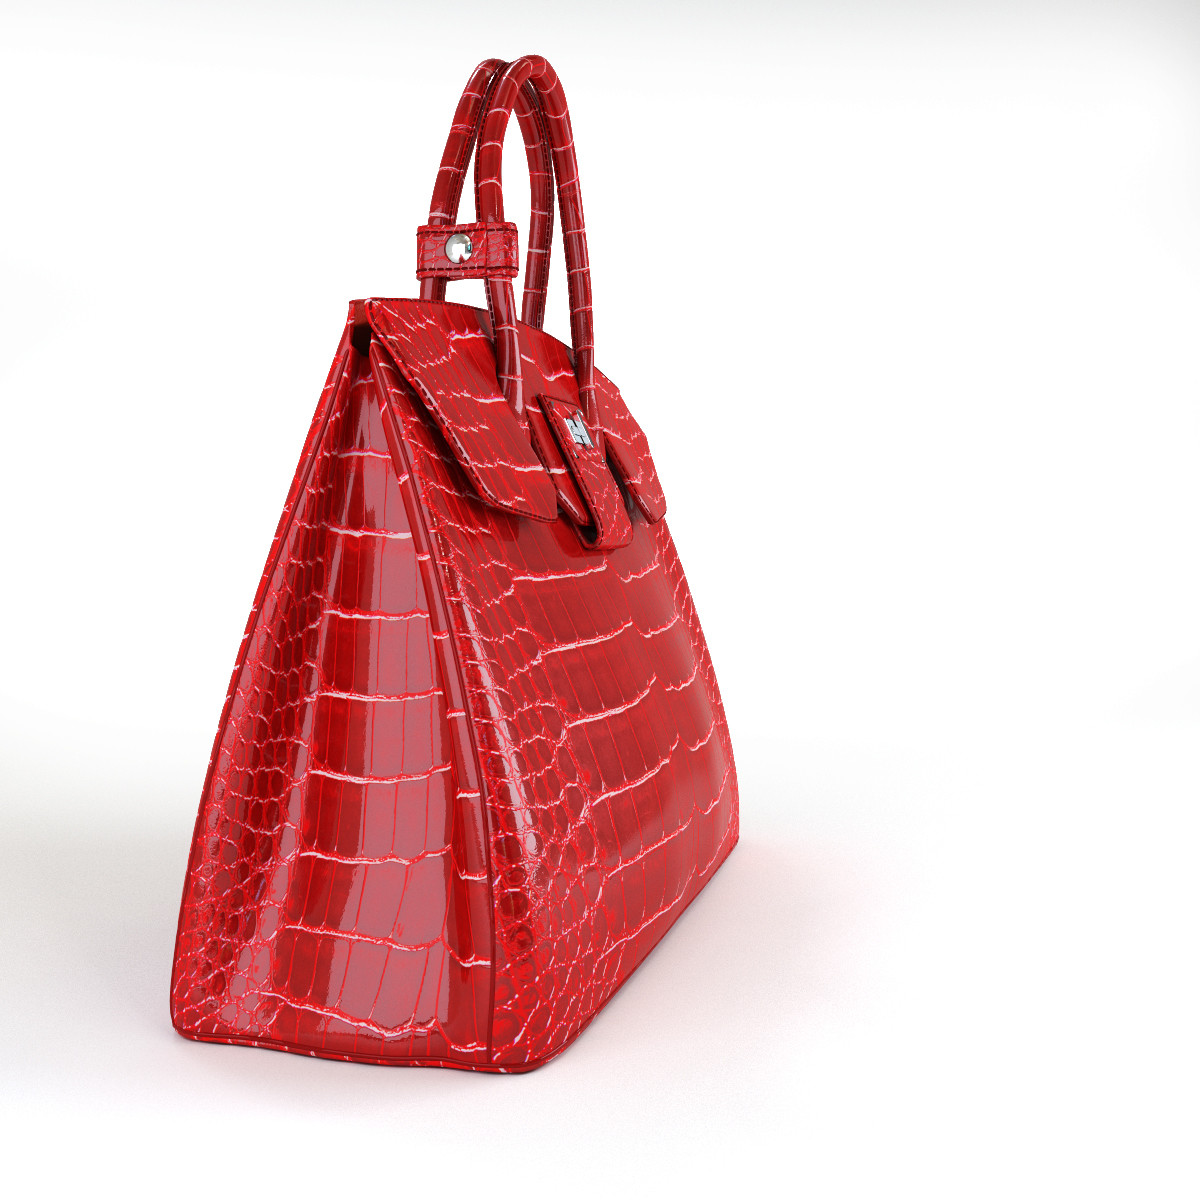 3D model Hermes Birkin Red Crocodile Bag with accessories VR / AR /  low-poly